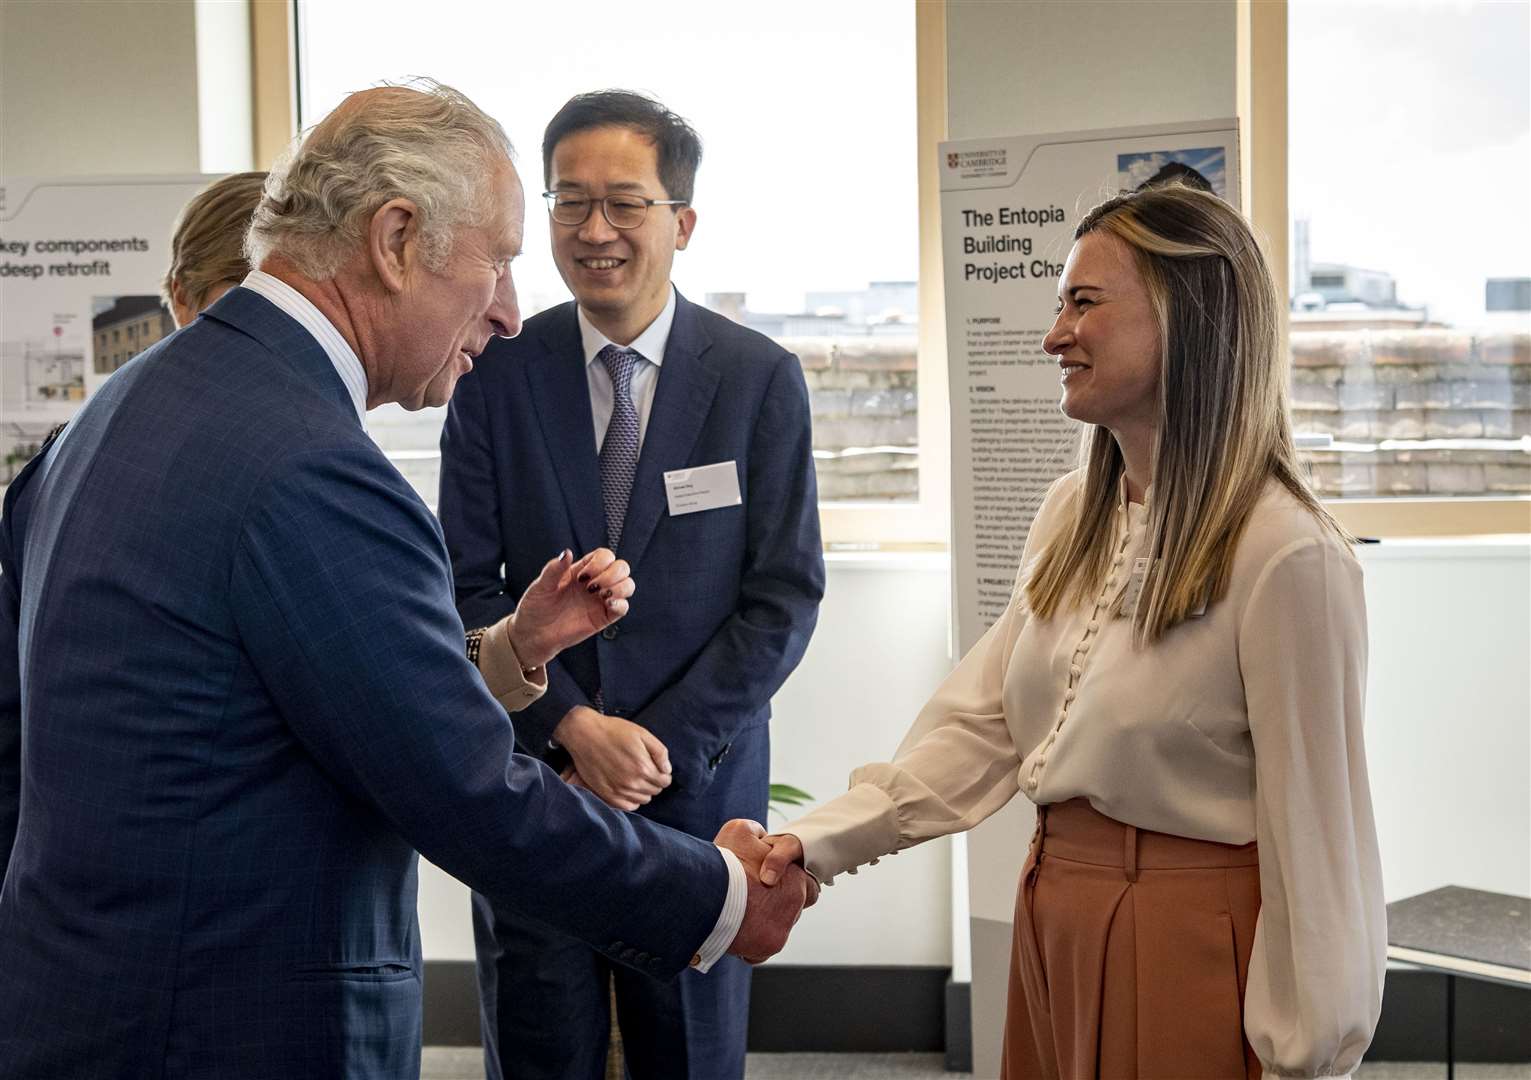 King Charles meets Lucy Townsend, Head of sustainability, at the opening of The Entopia Building